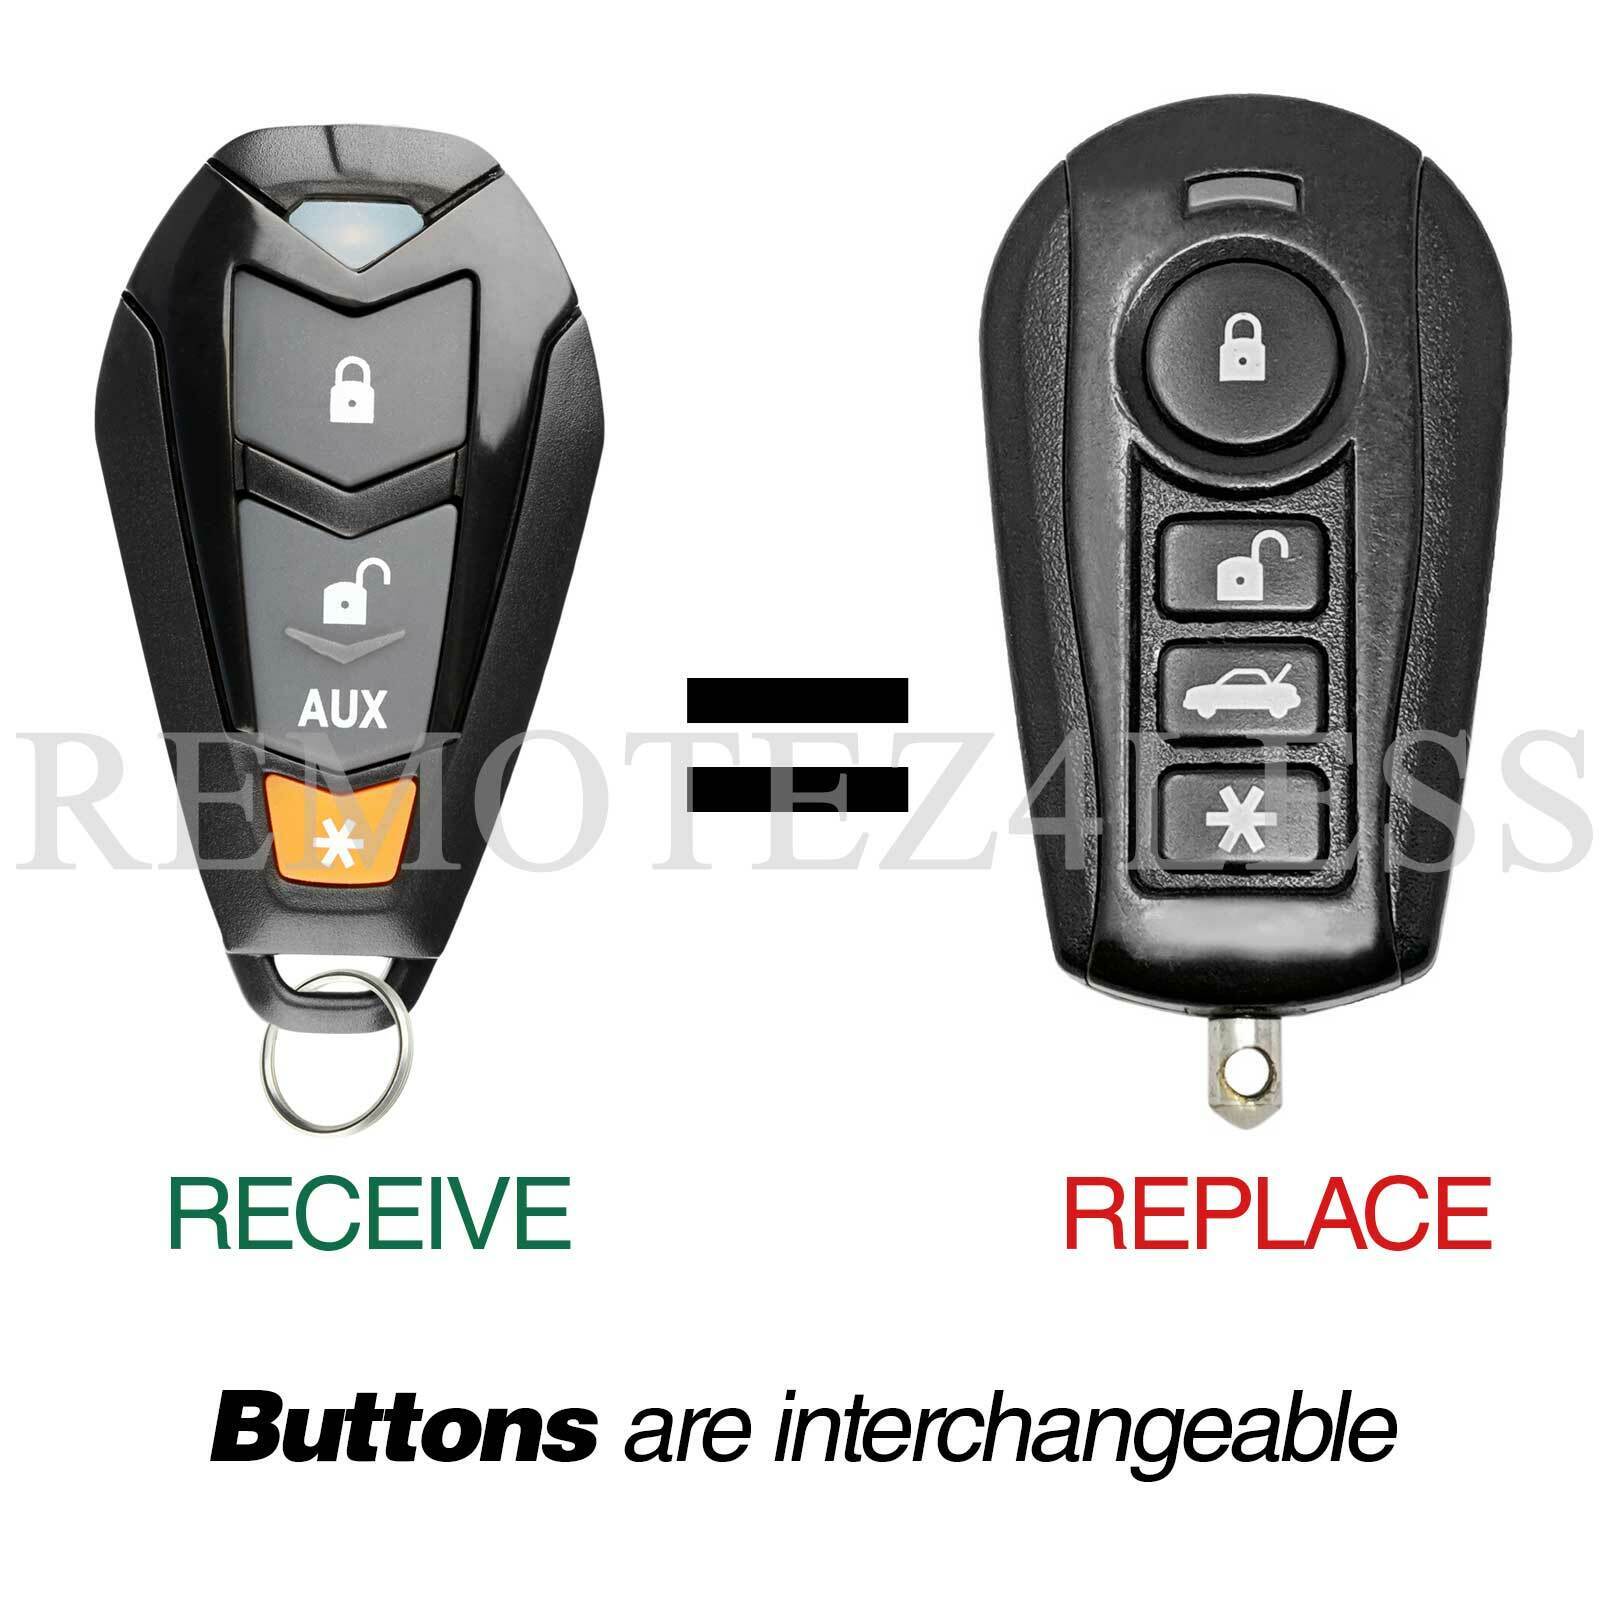 New Replacement Clifford 4 Button Keyless Remote Key Fob For EZSDEI7141 Black